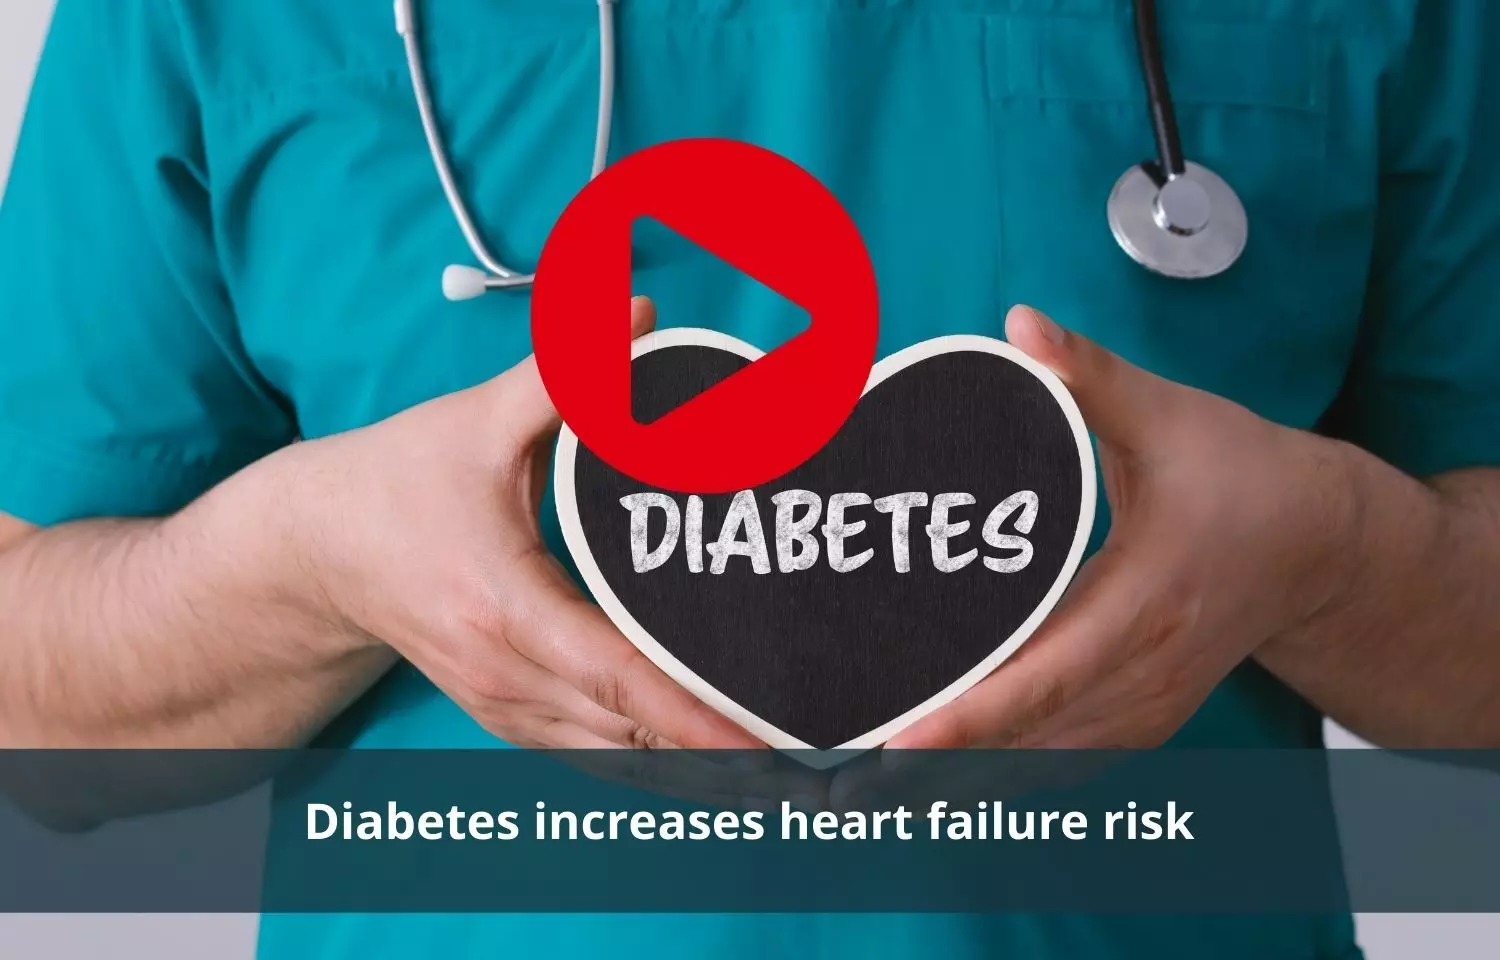 Uncontrolled Diabetes increases heart failure risk in patients